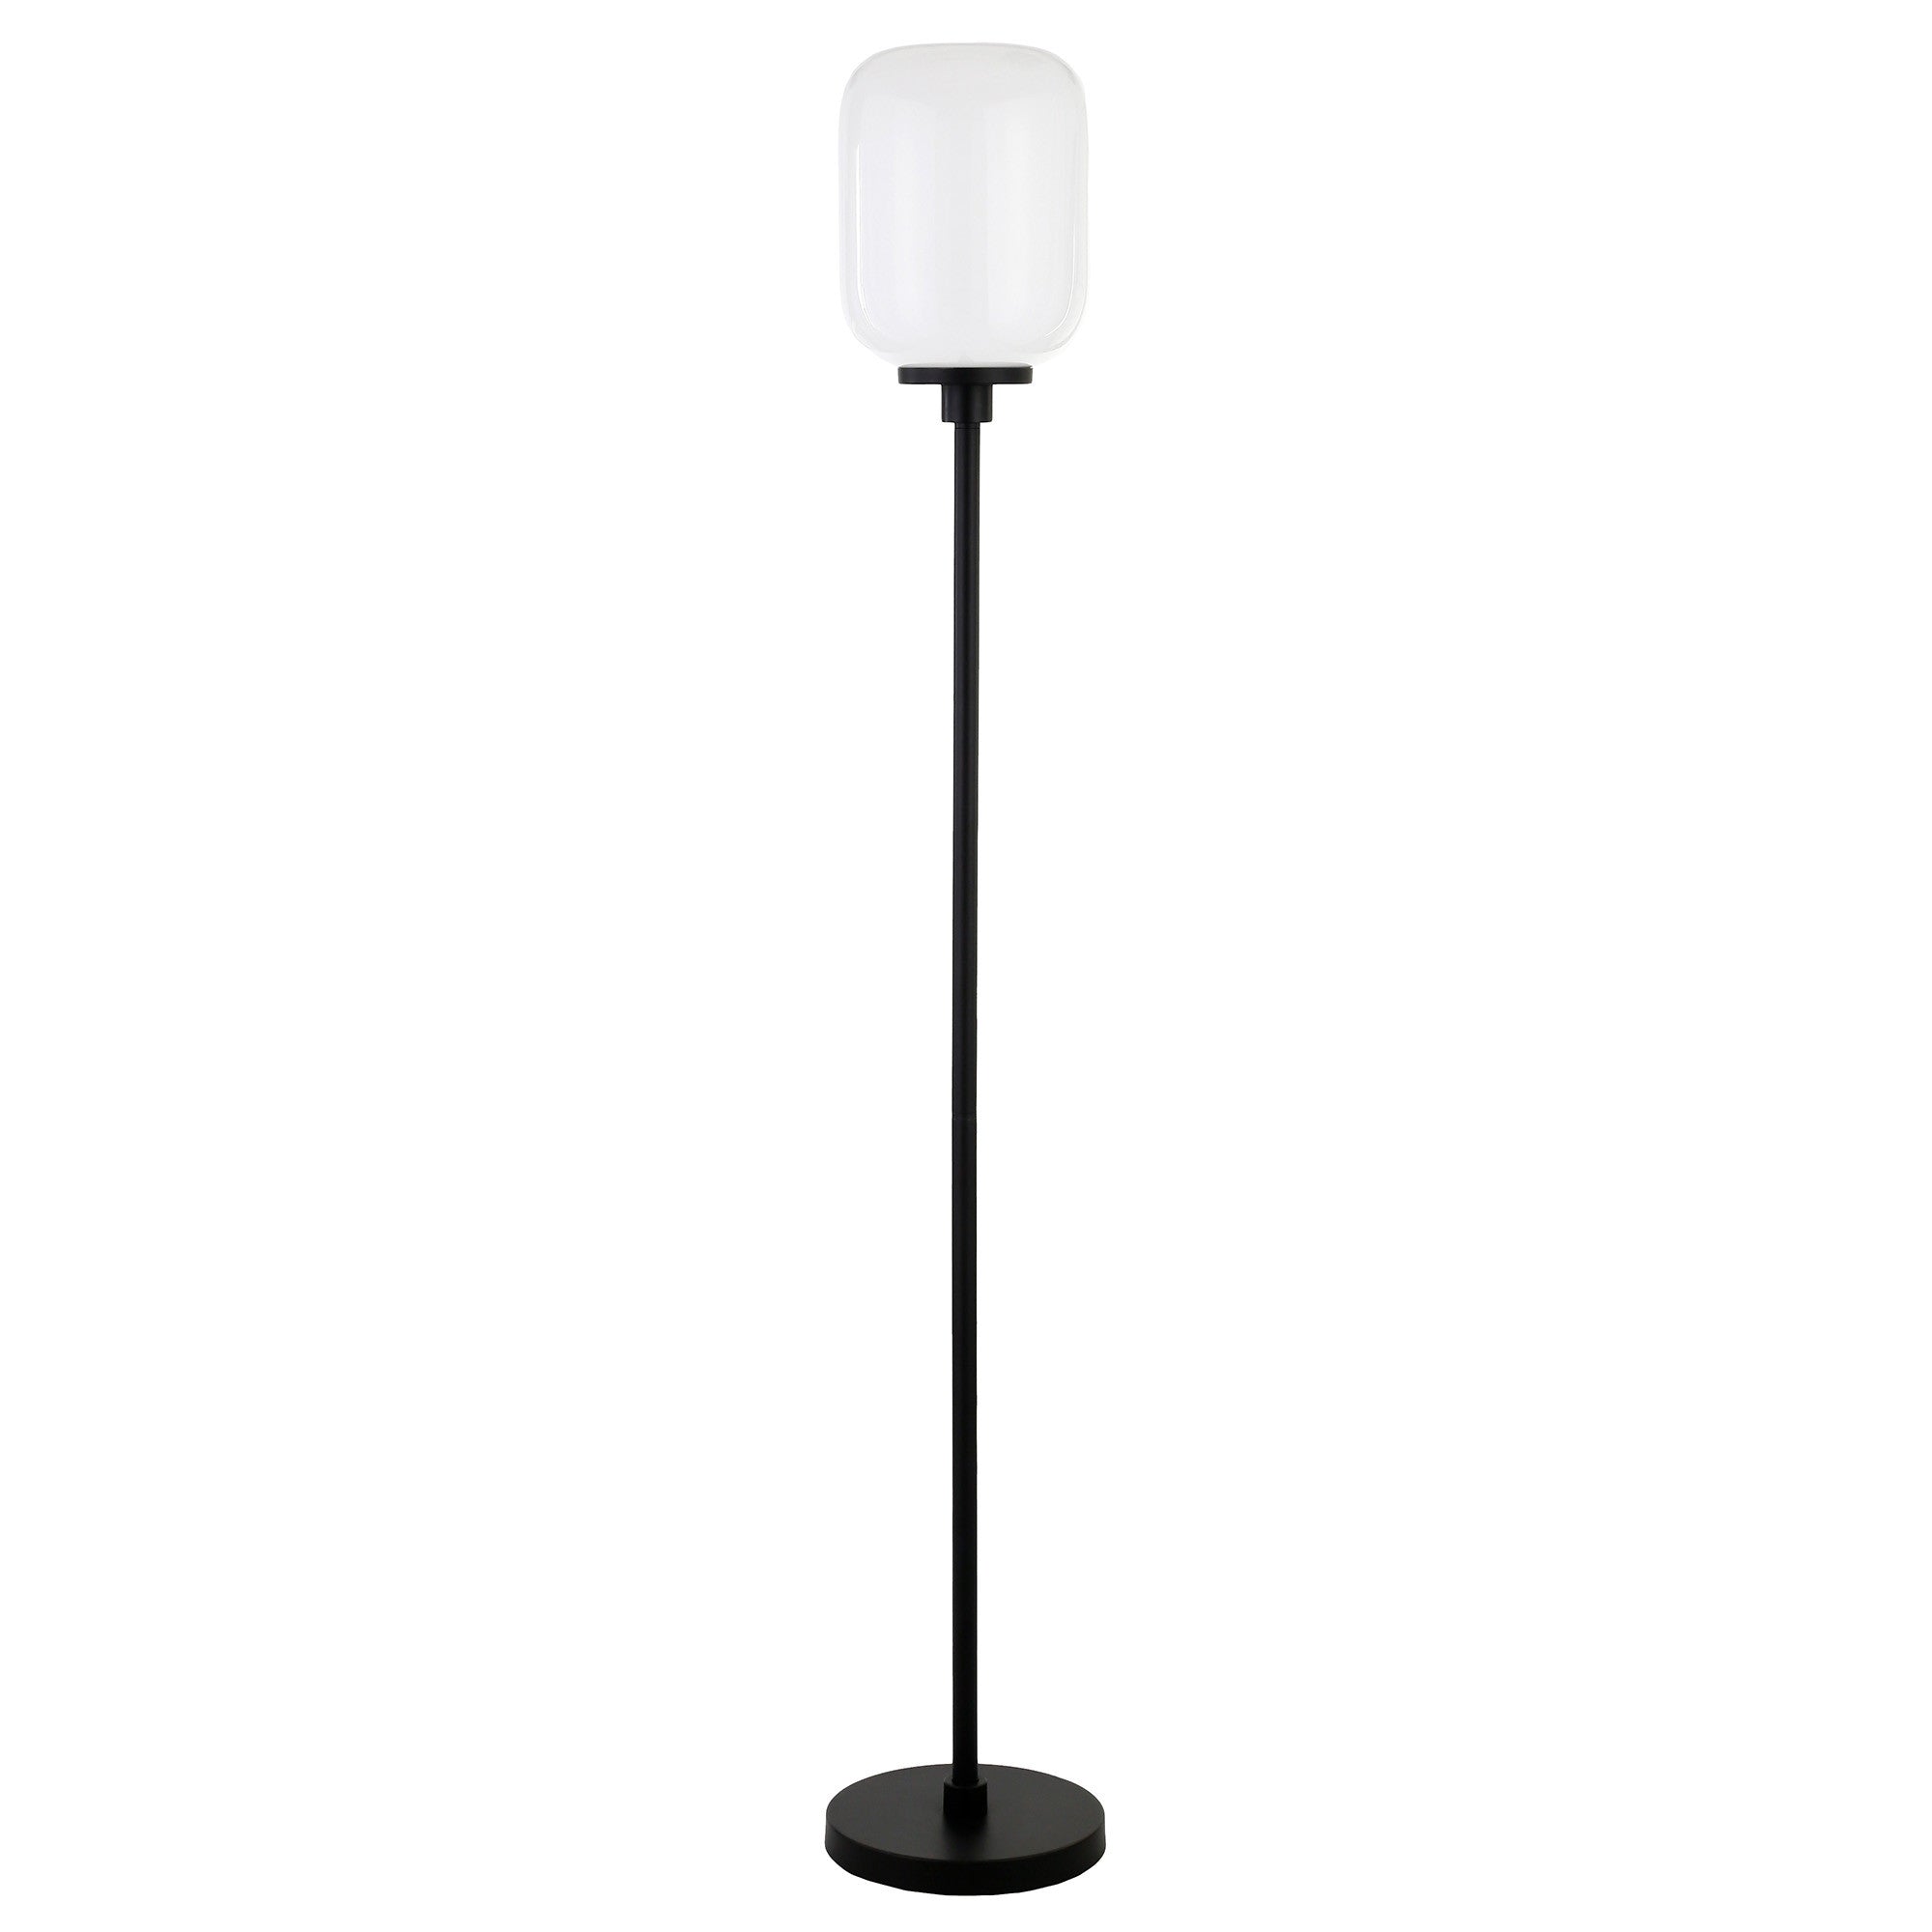 69" Black Novelty Floor Lamp With White Frosted Glass Globe Shade